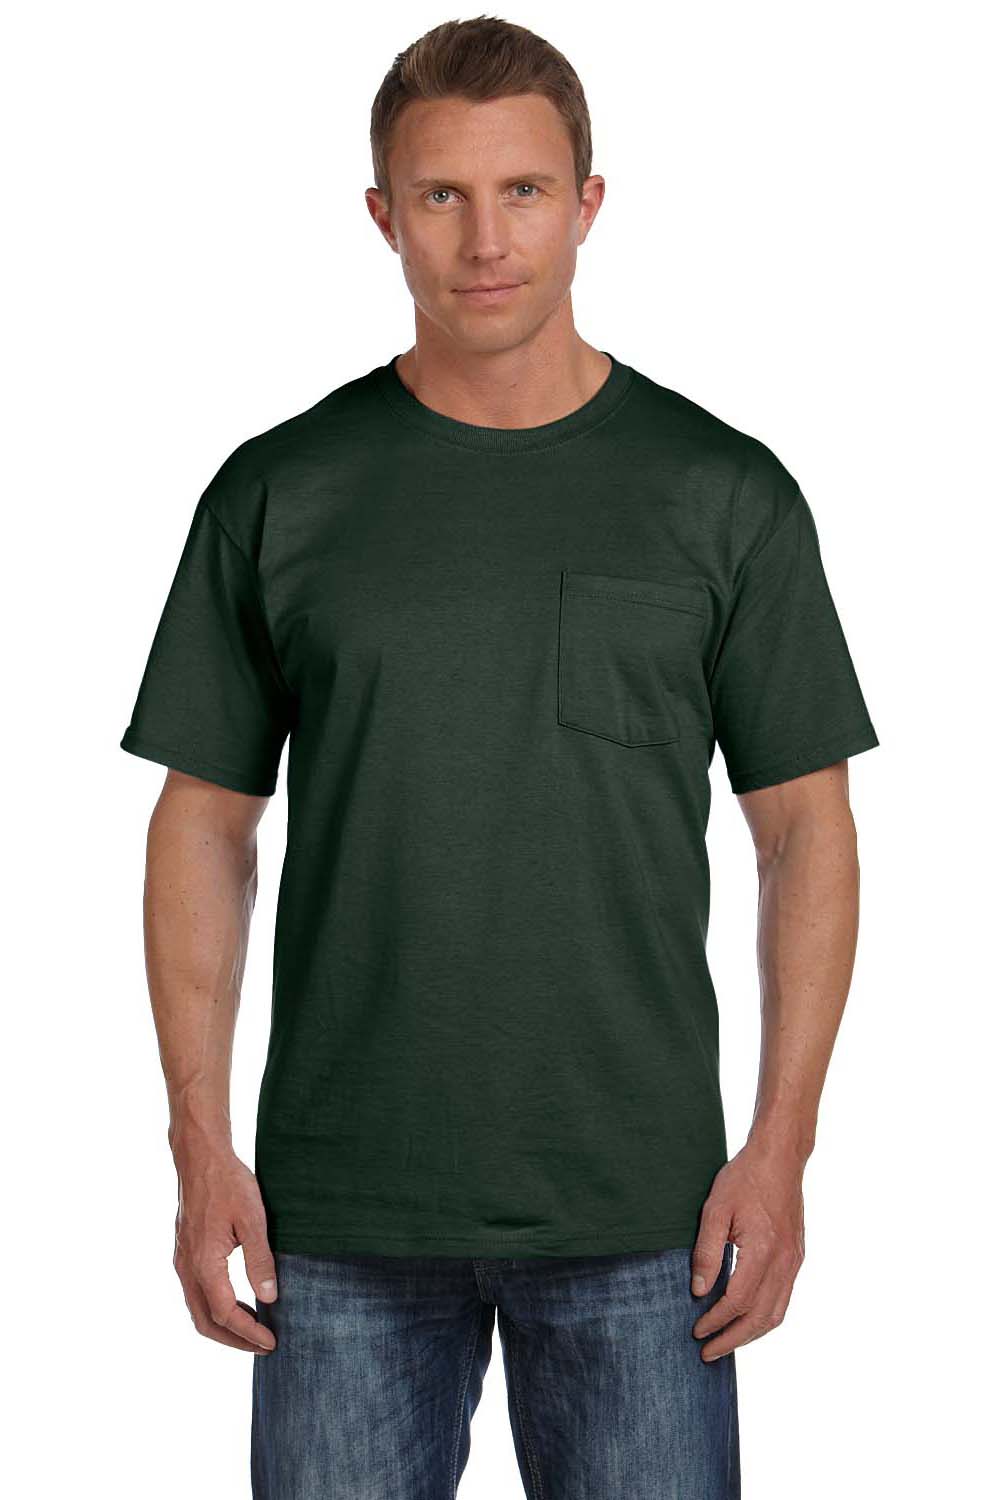 Fruit Of The Loom 3931P Mens HD Jersey Short Sleeve Crewneck T-Shirt w/ Pocket Forest Green Front